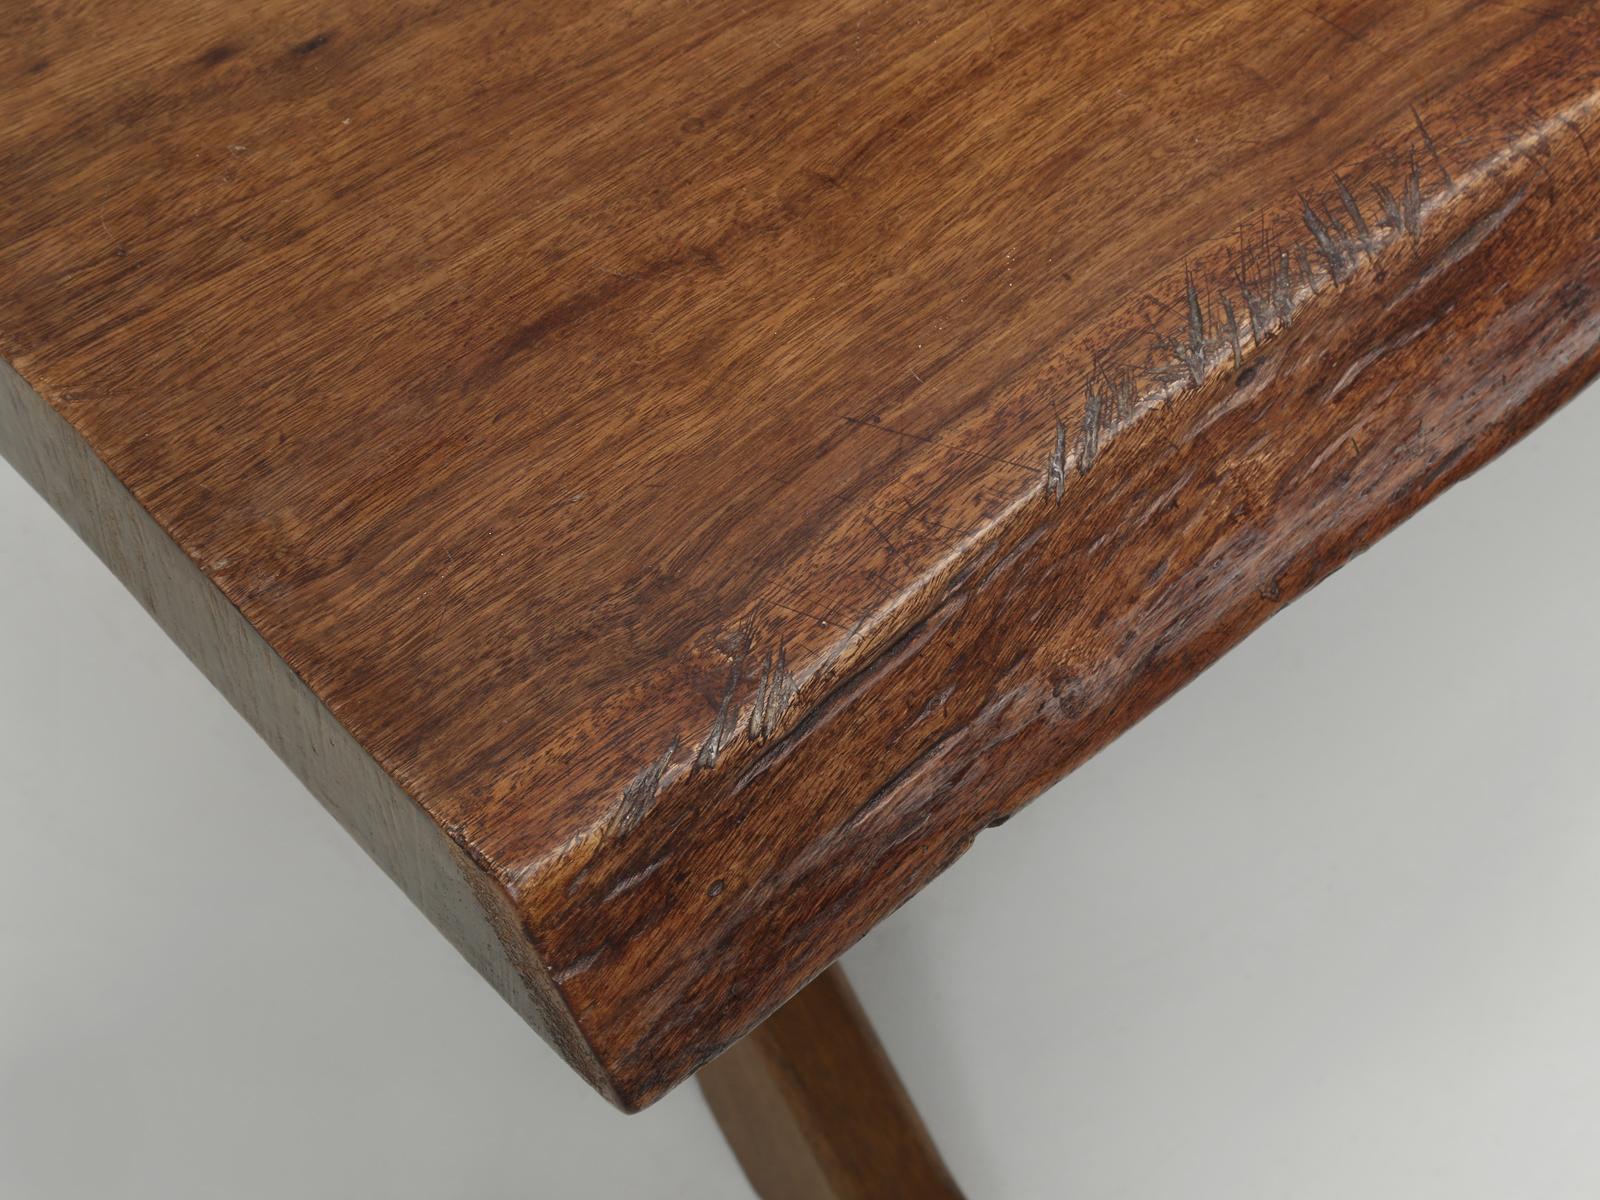 Hand-Crafted Antique French Live Edge Mahogany Trestle Dining Table from One Slab of Wood